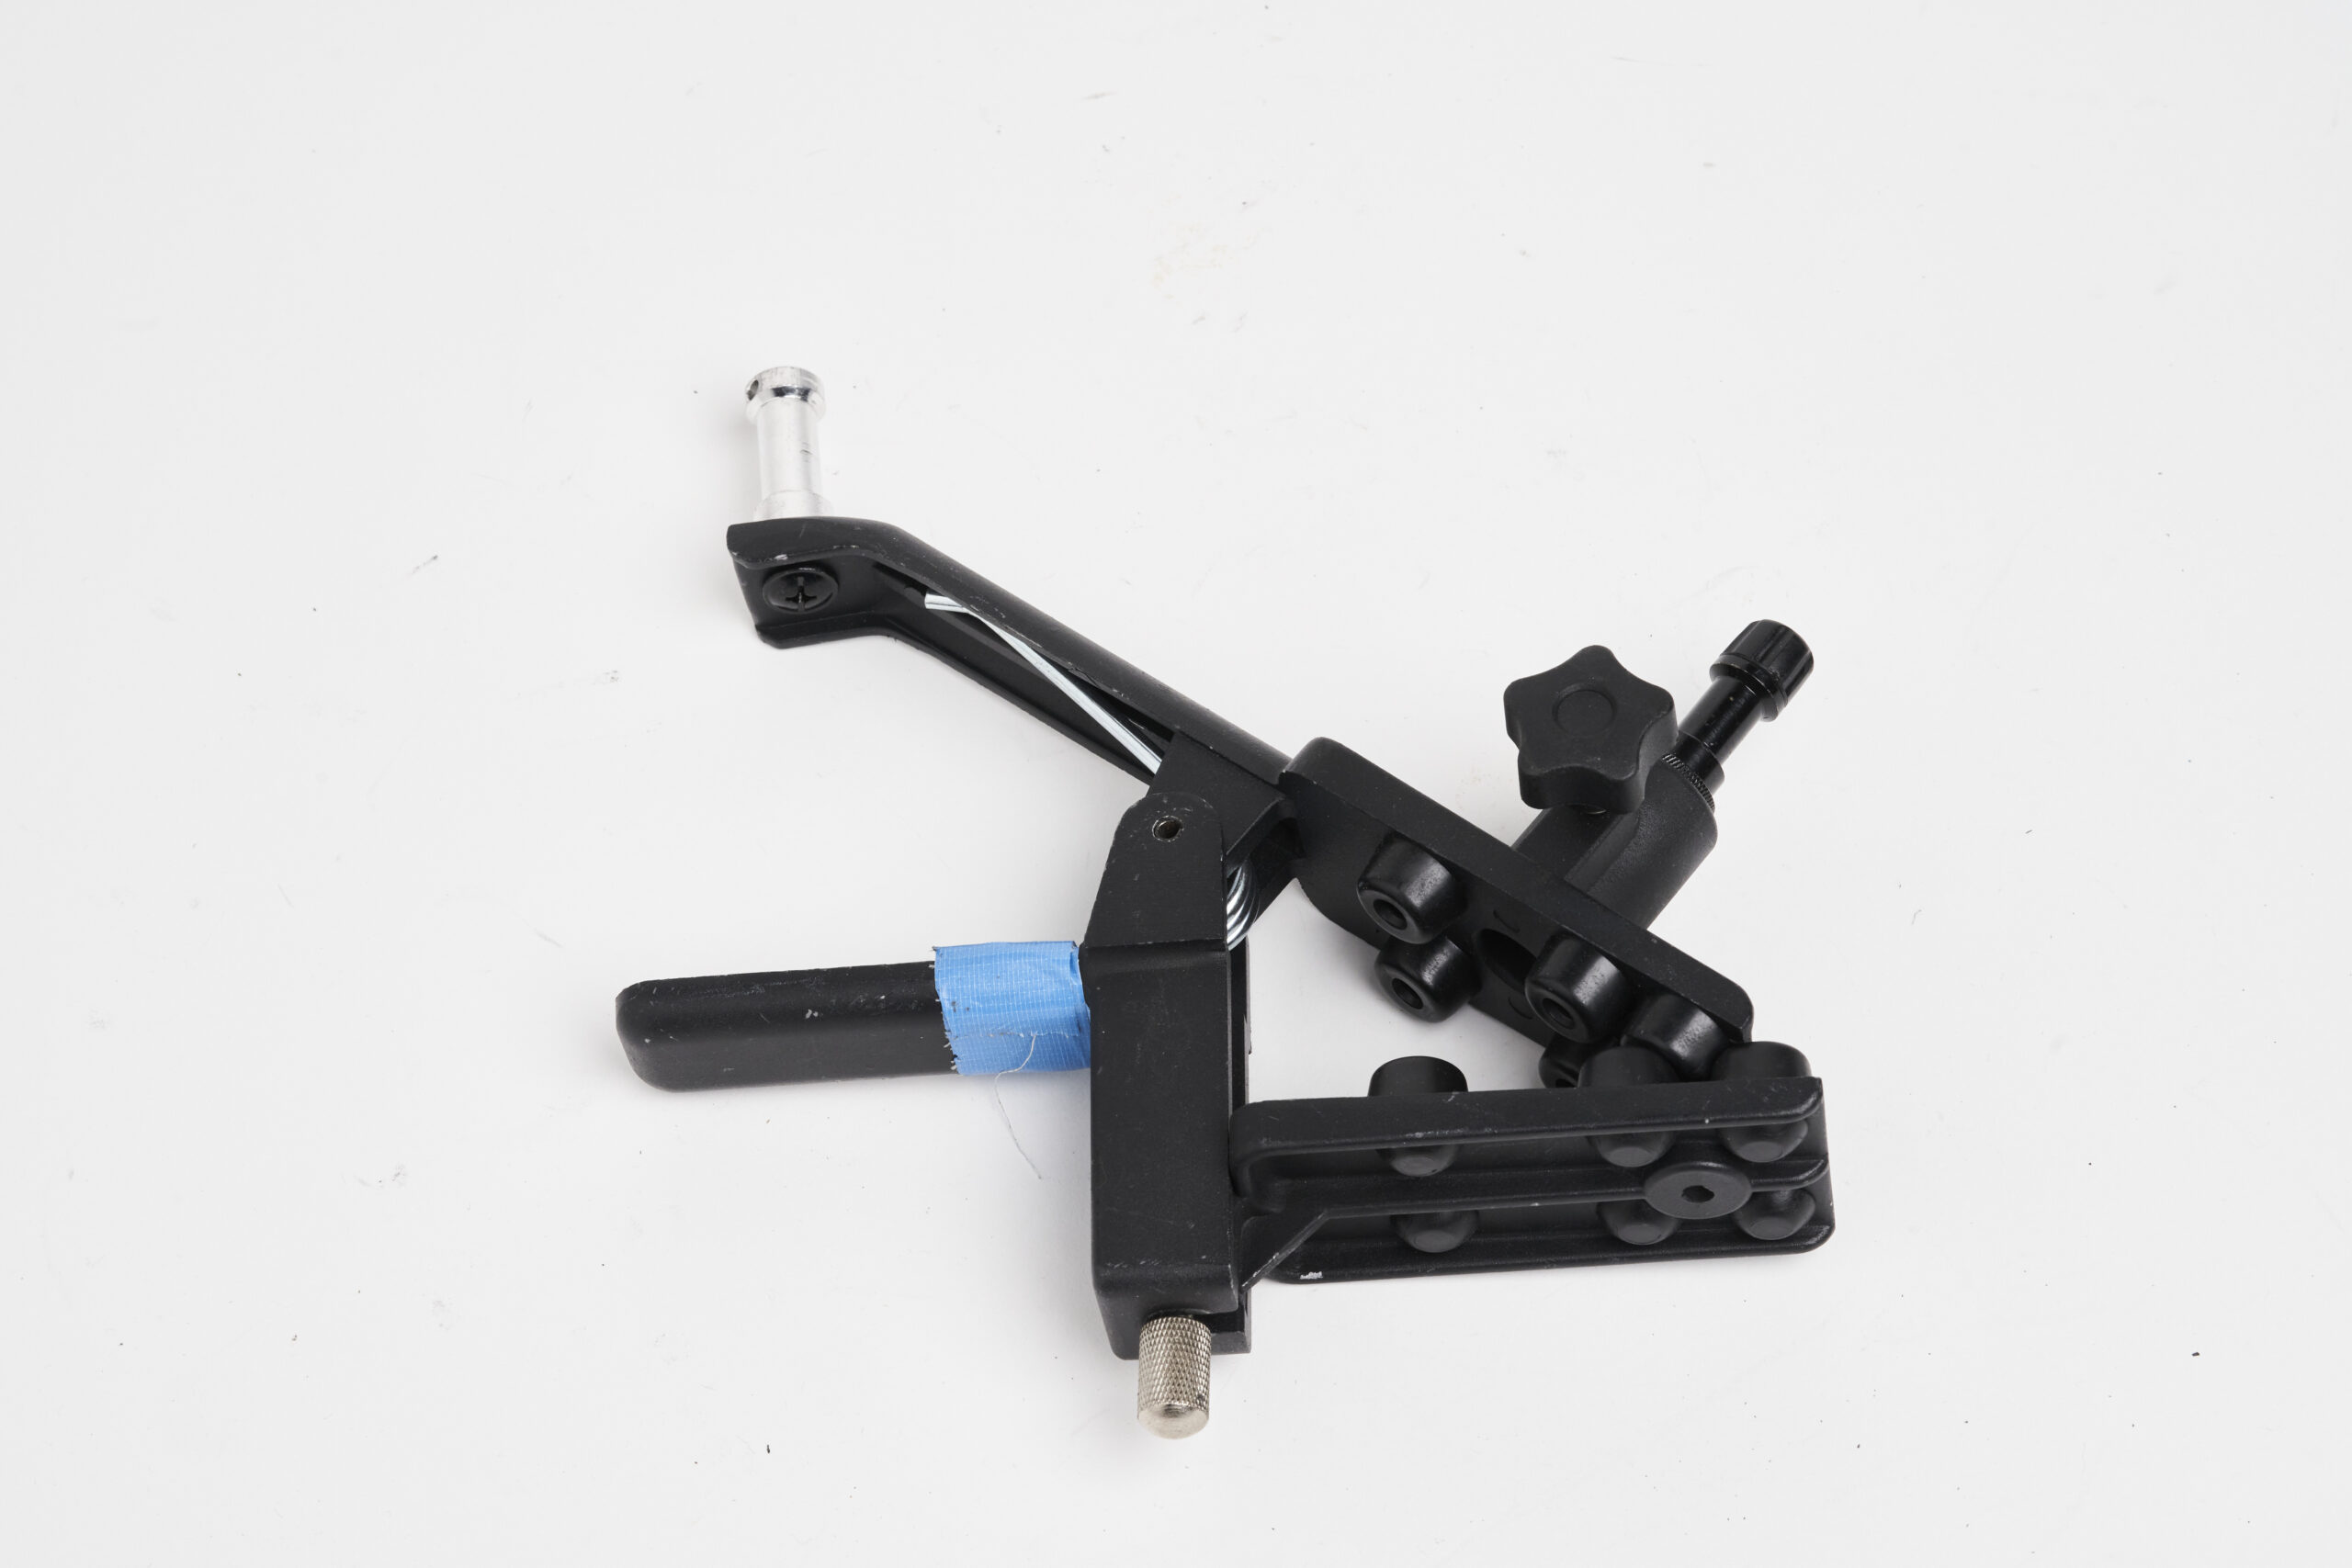 Manfrotto-043-Skyhook-Clamp